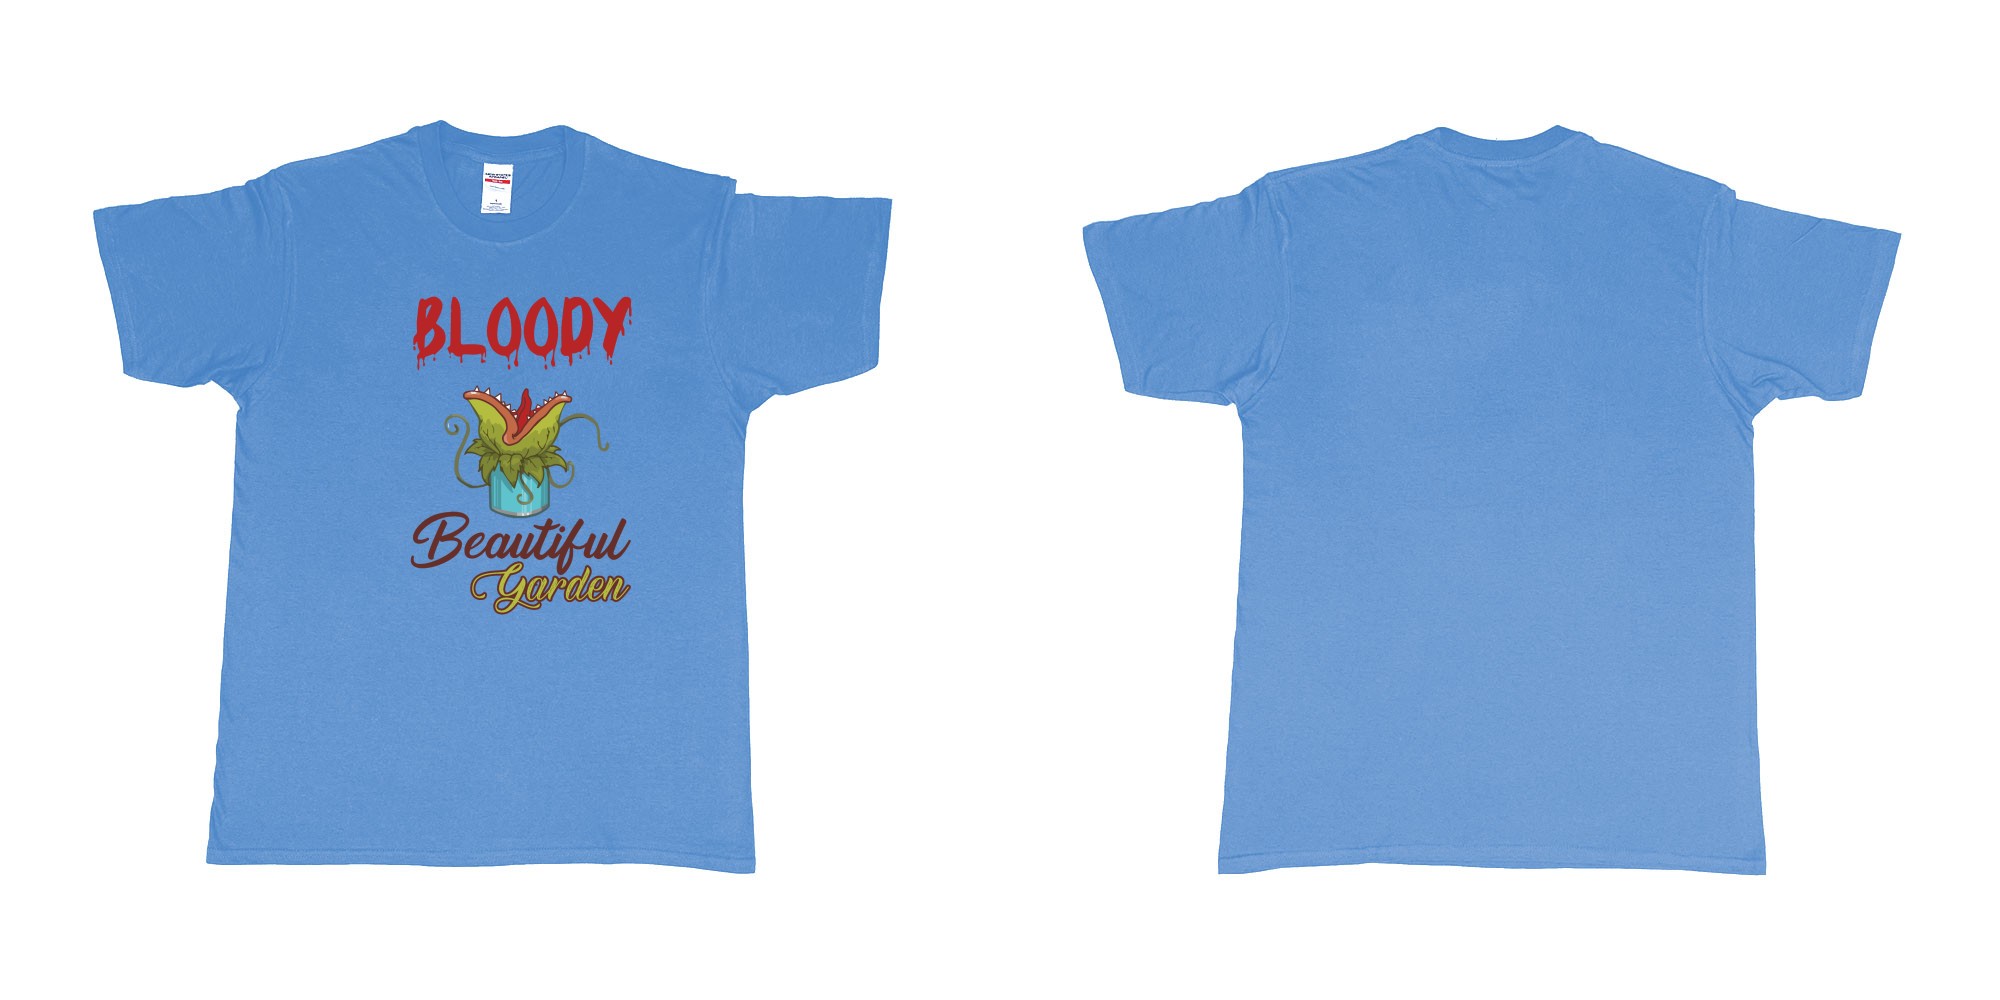 Custom tshirt design bloody beautiful garden little shop of horror in fabric color carolina-blue choice your own text made in Bali by The Pirate Way